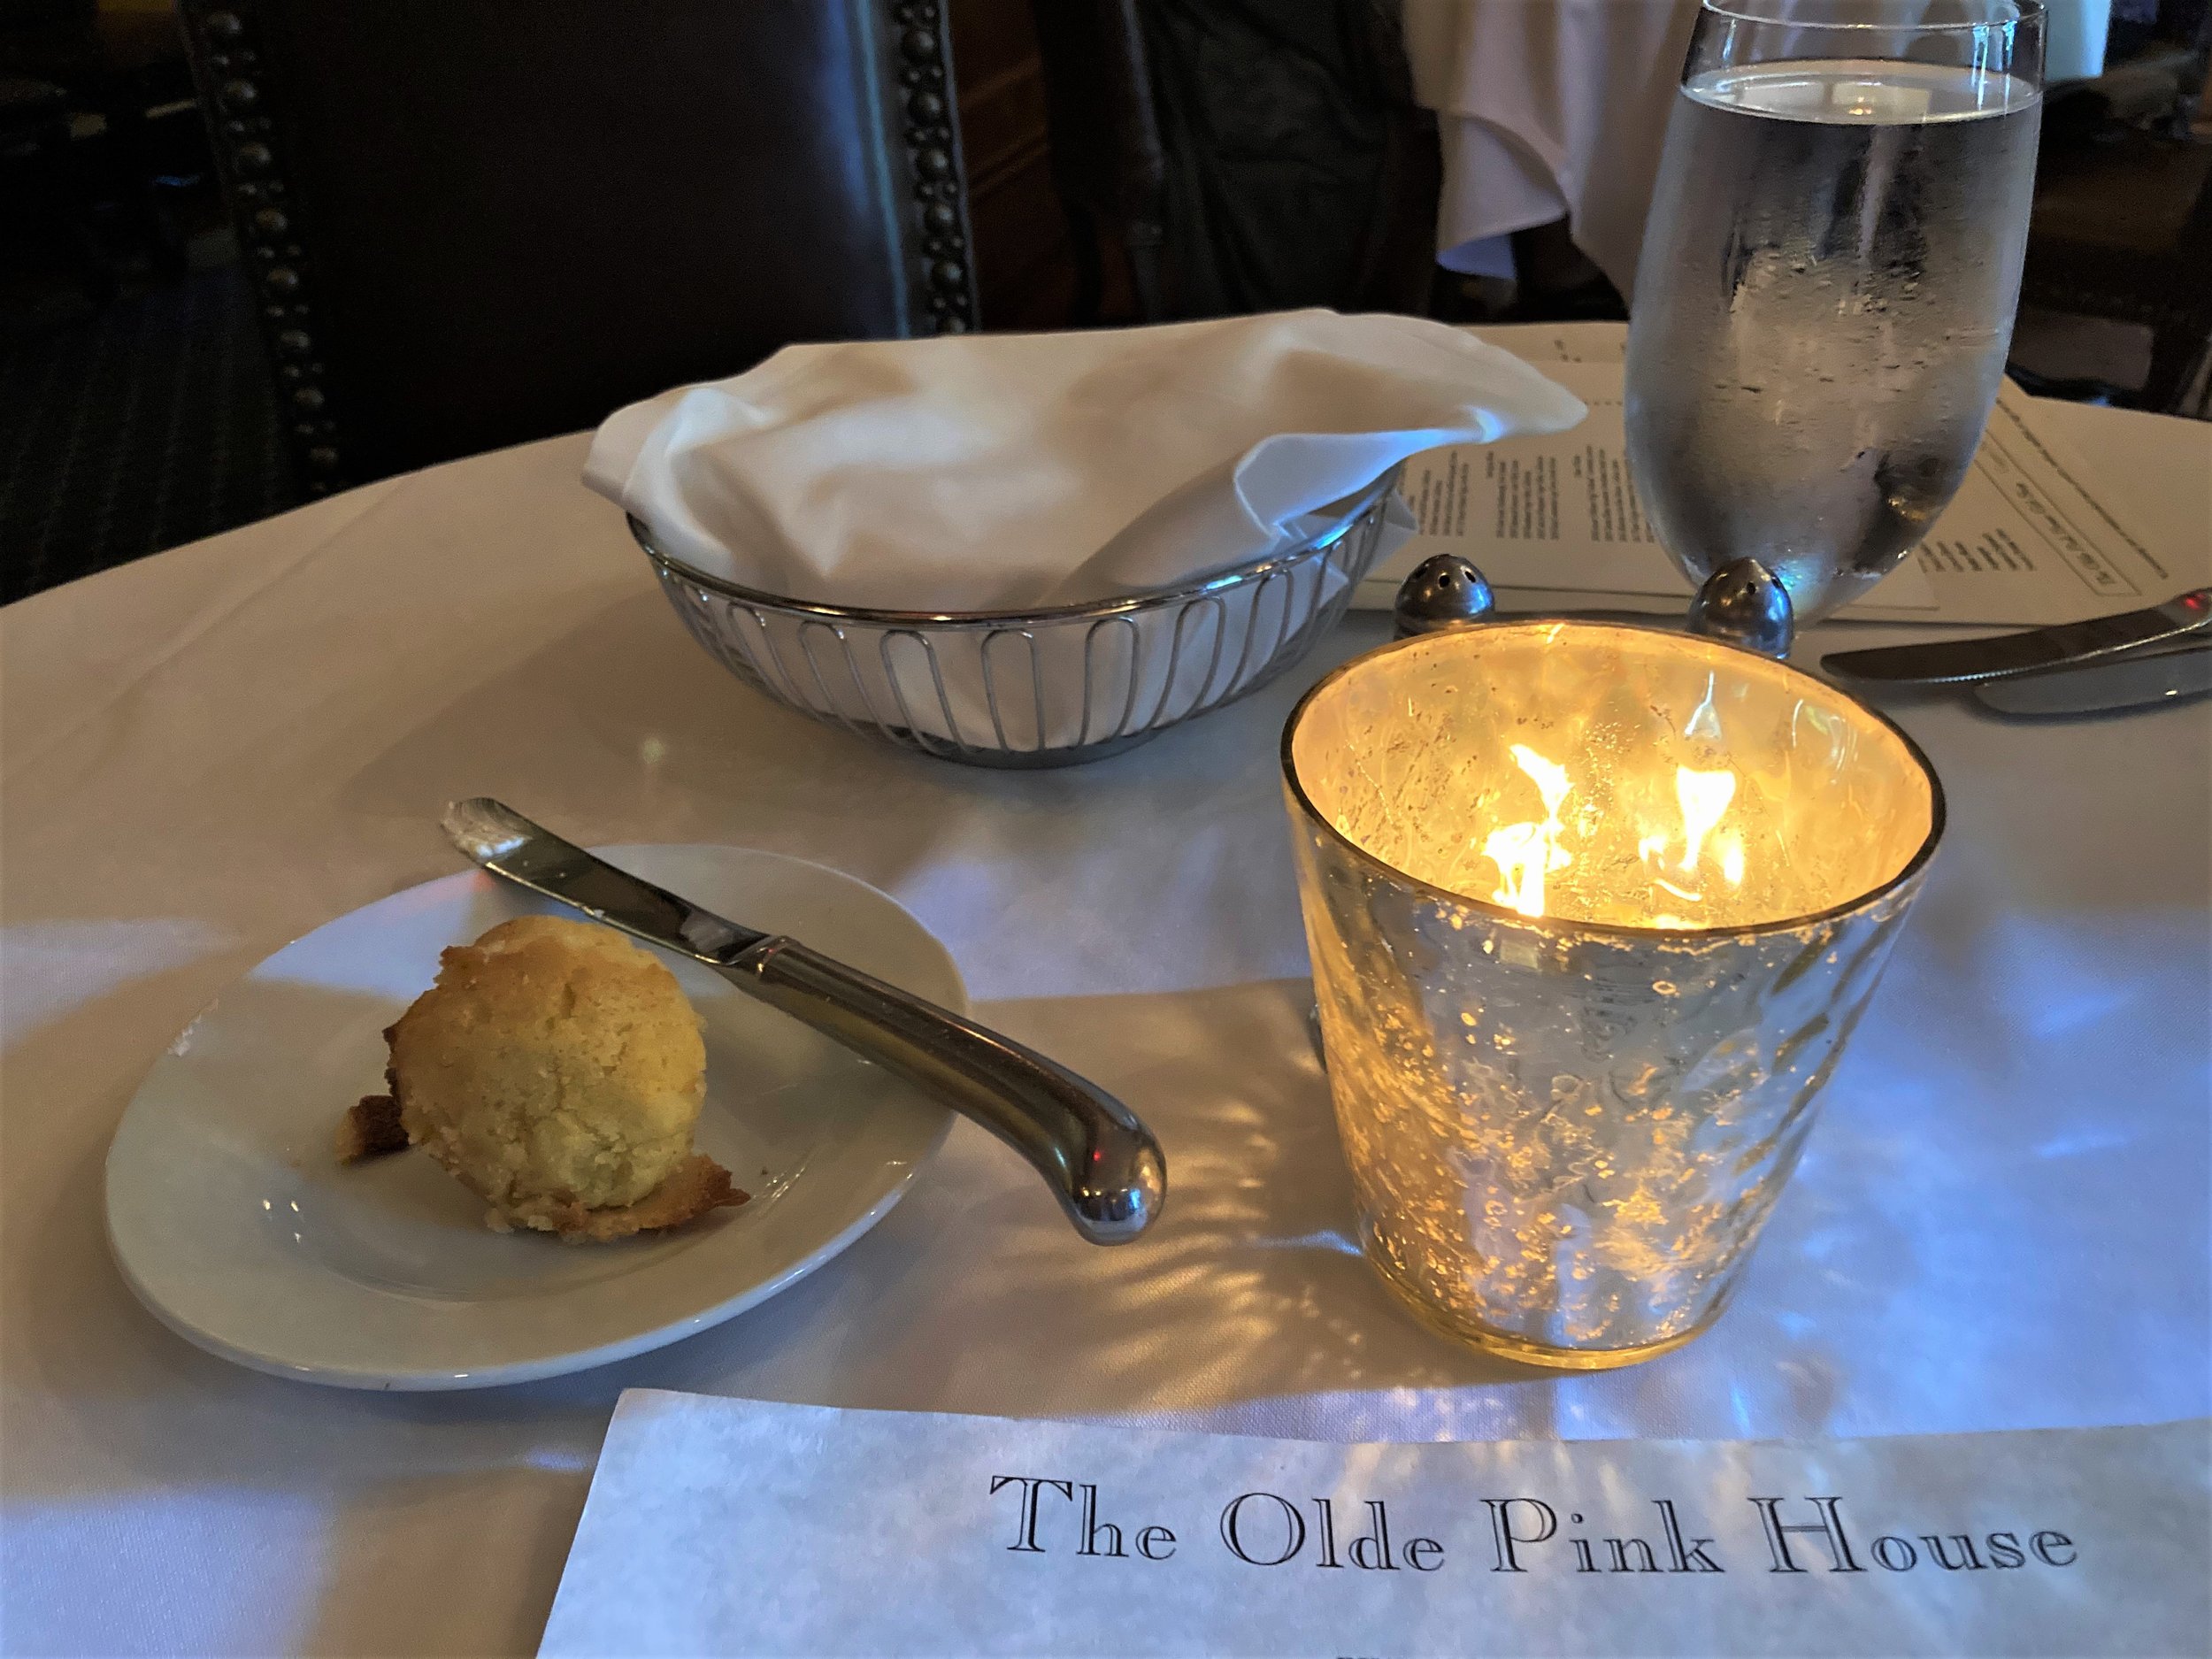 Romantic setting at The Olde Pink House